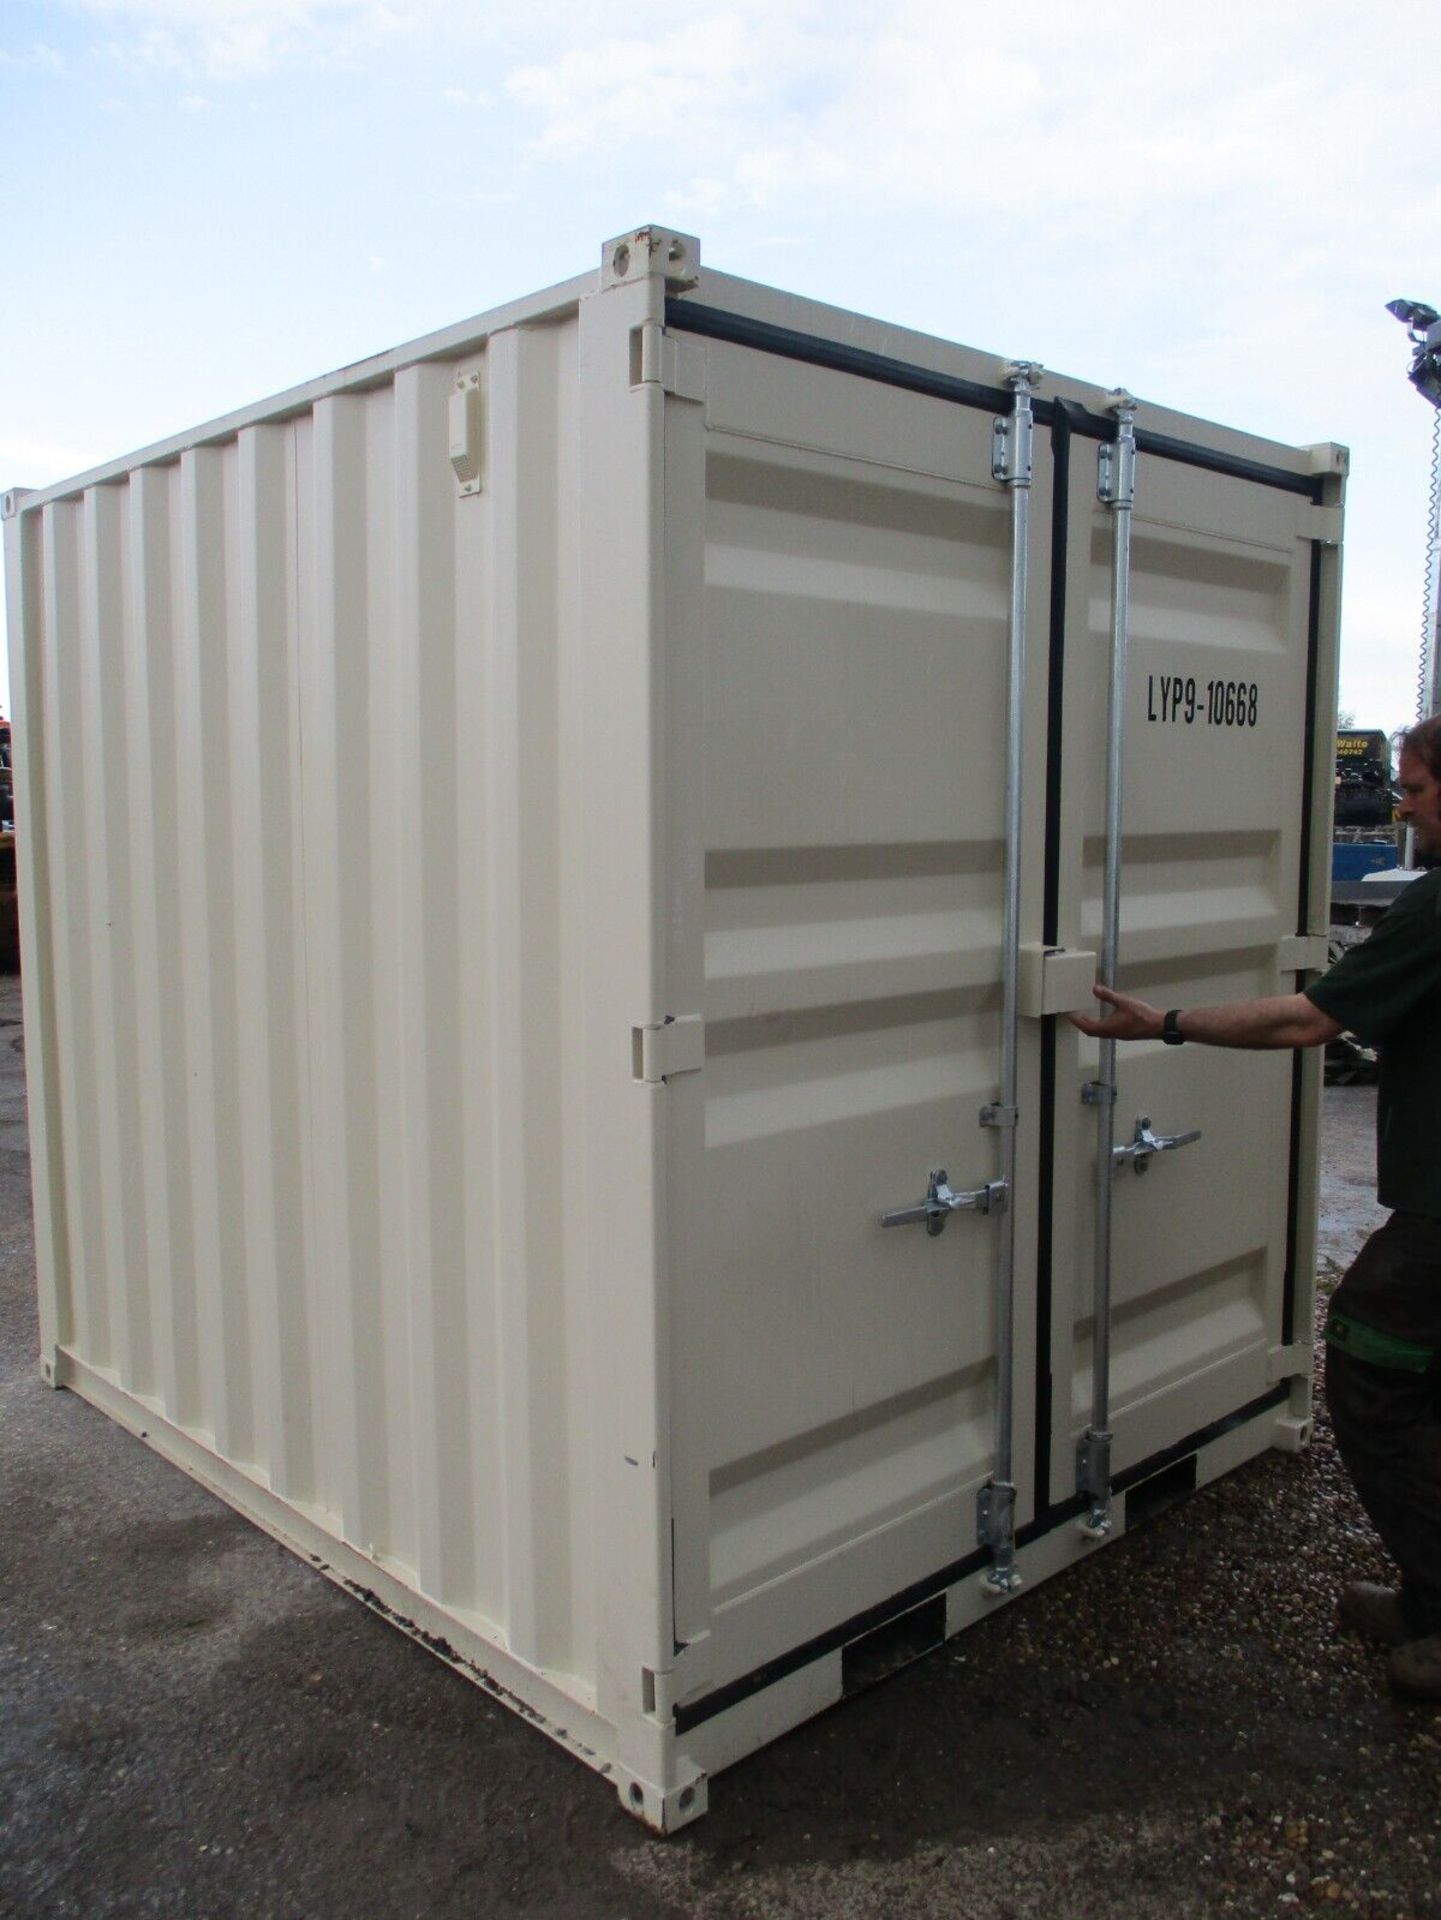 YOUR HOME OFFICE AWAITS: 9-FOOT CONTAINER WITH WINDOW - Image 4 of 7